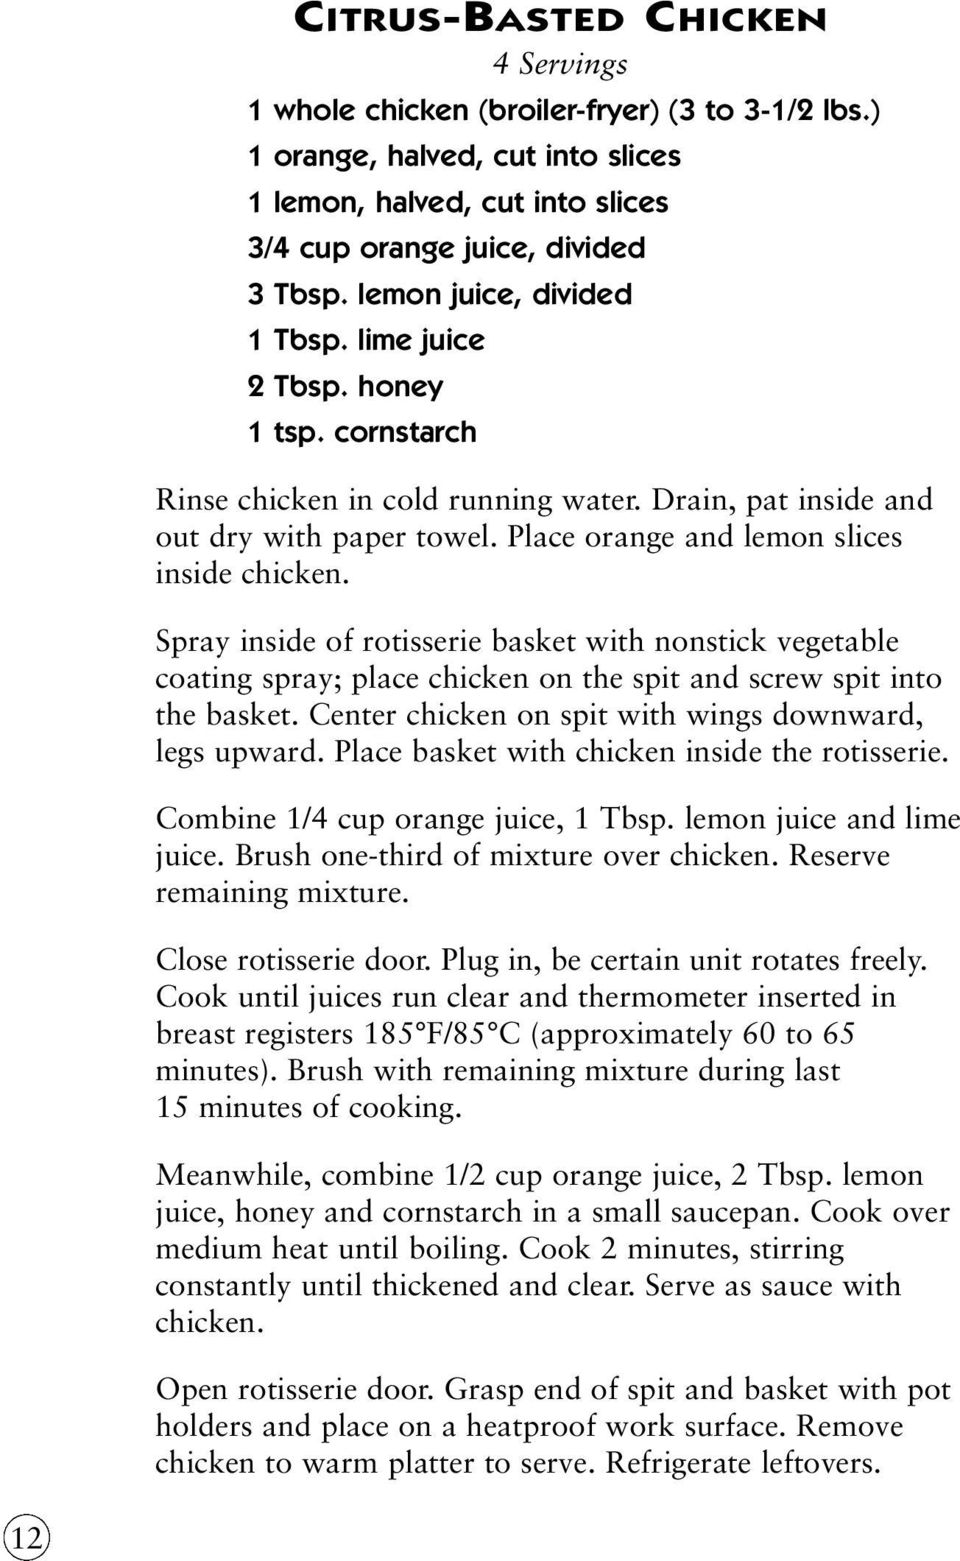 Place orange and lemon slices inside chicken. Spray inside of rotisserie basket with nonstick vegetable coating spray; place chicken on the spit and screw spit into the basket.